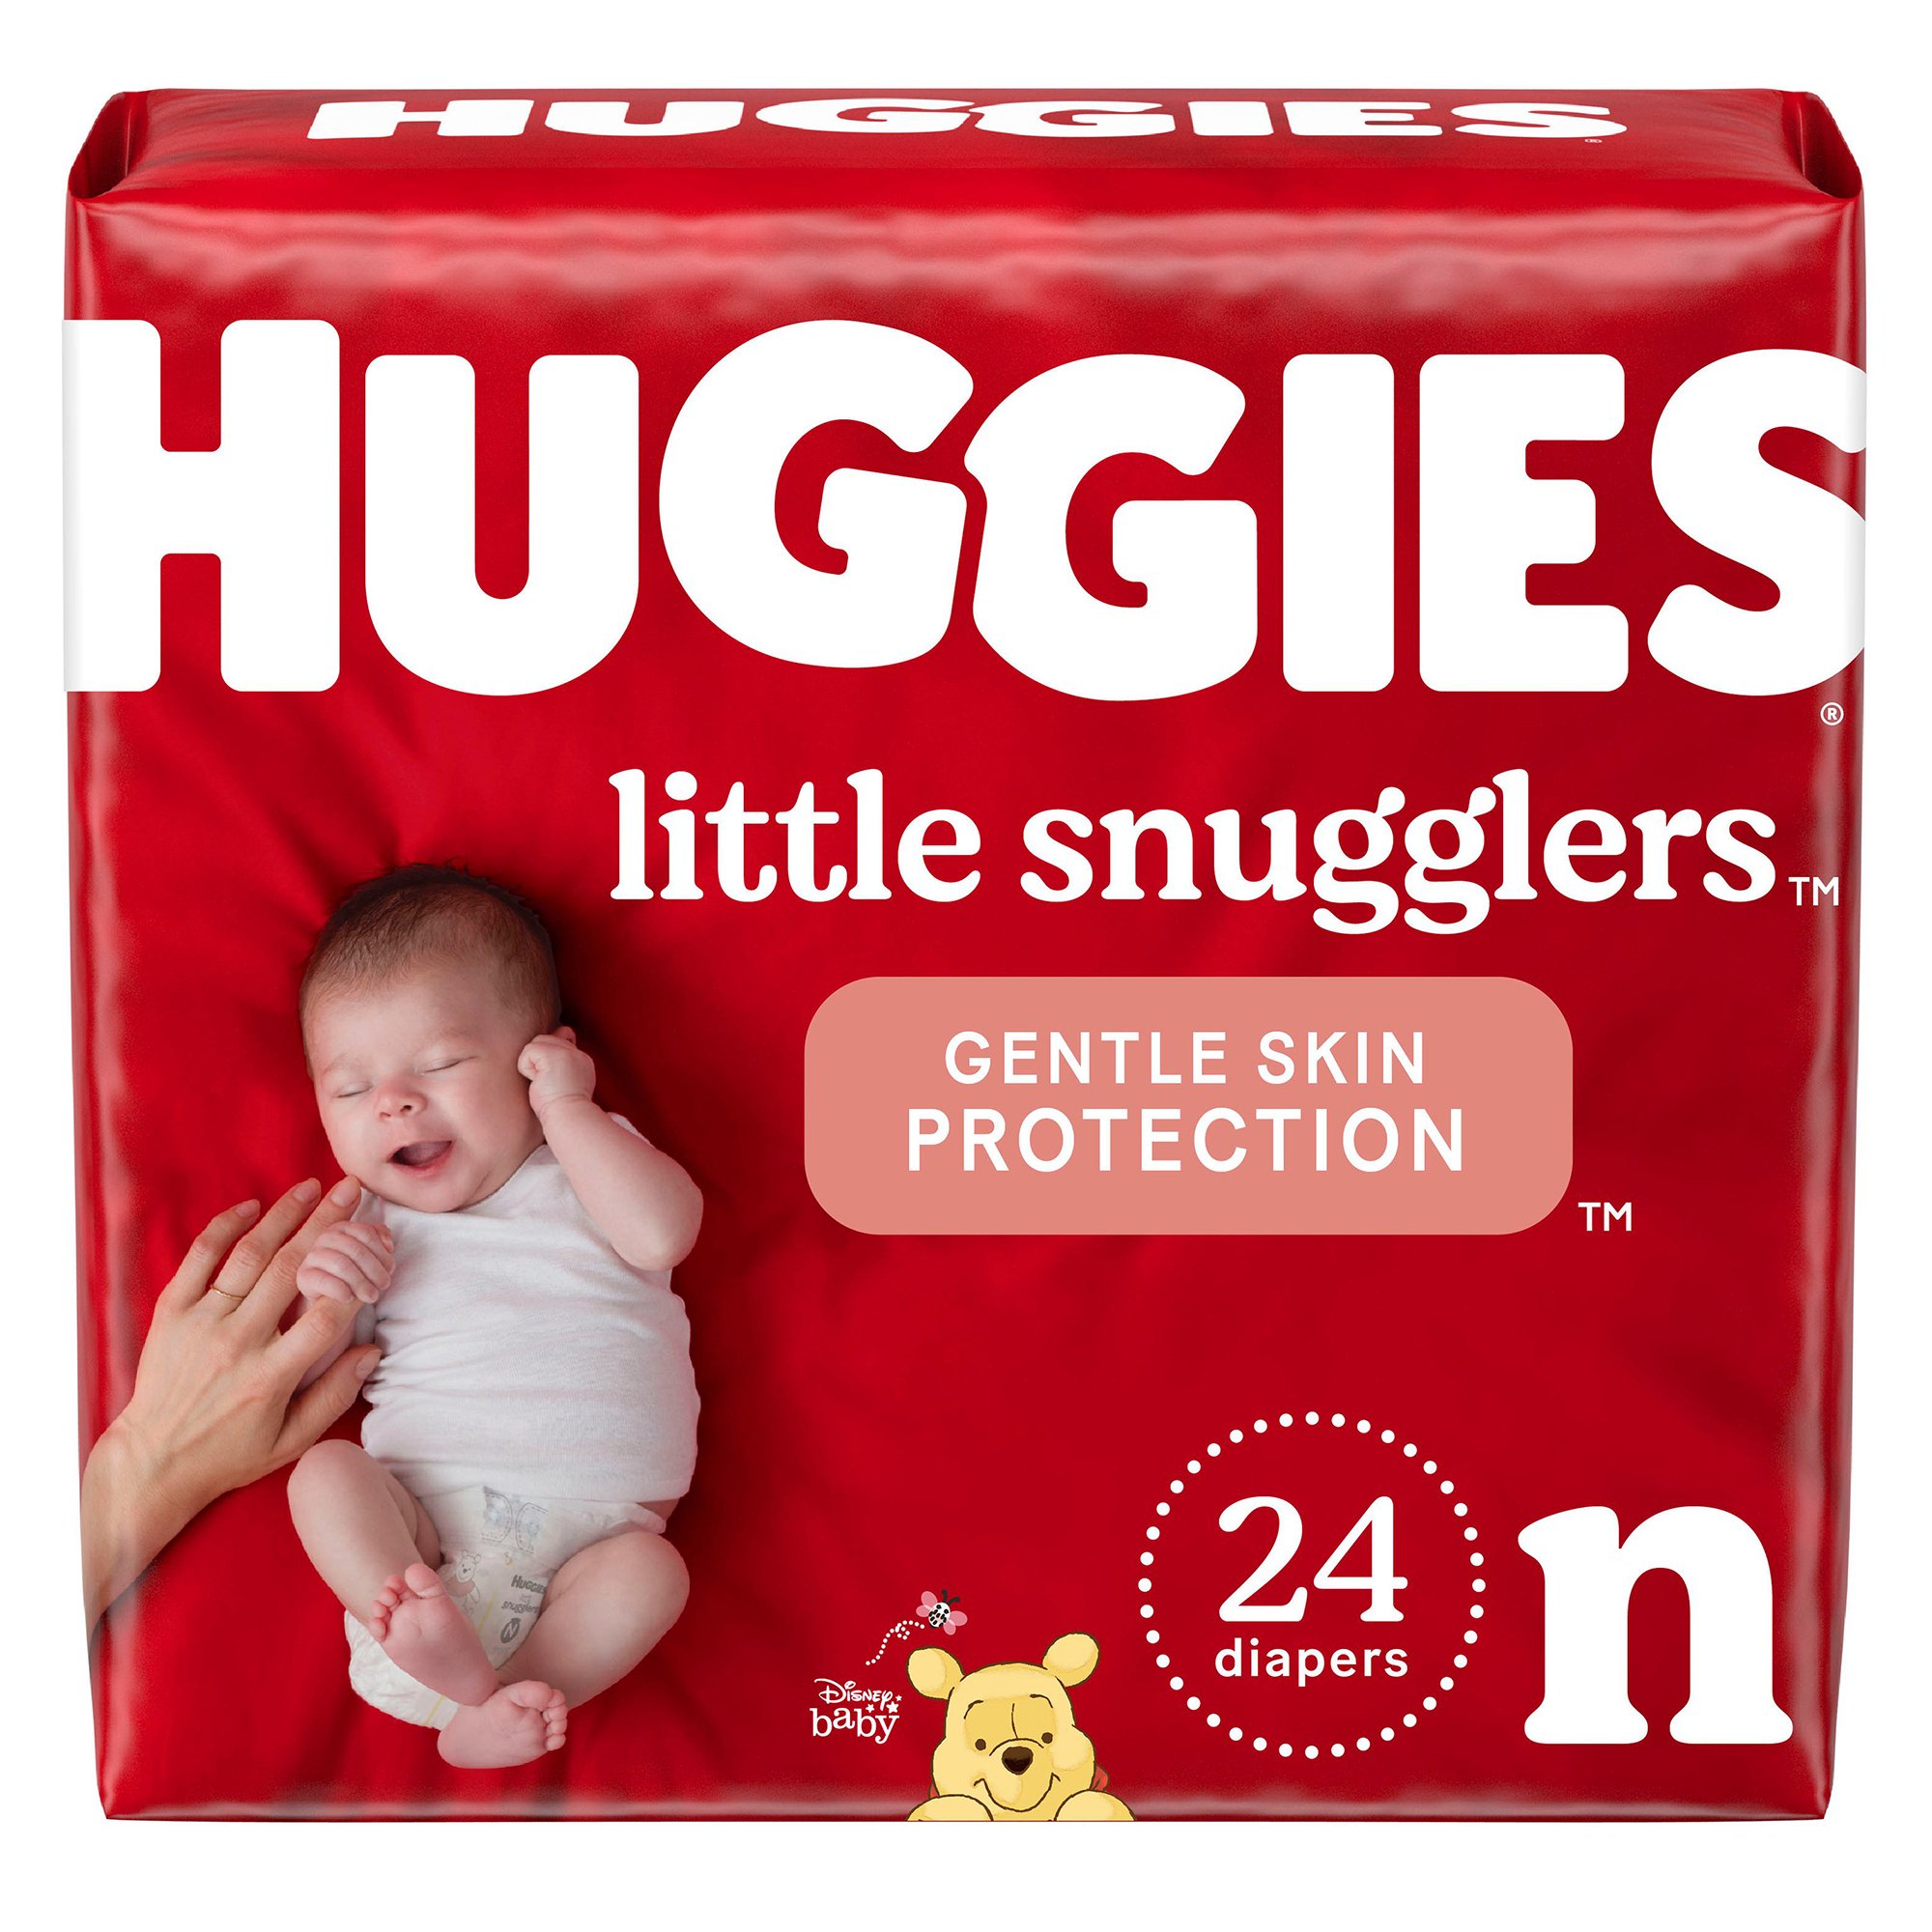 quality diapers blog